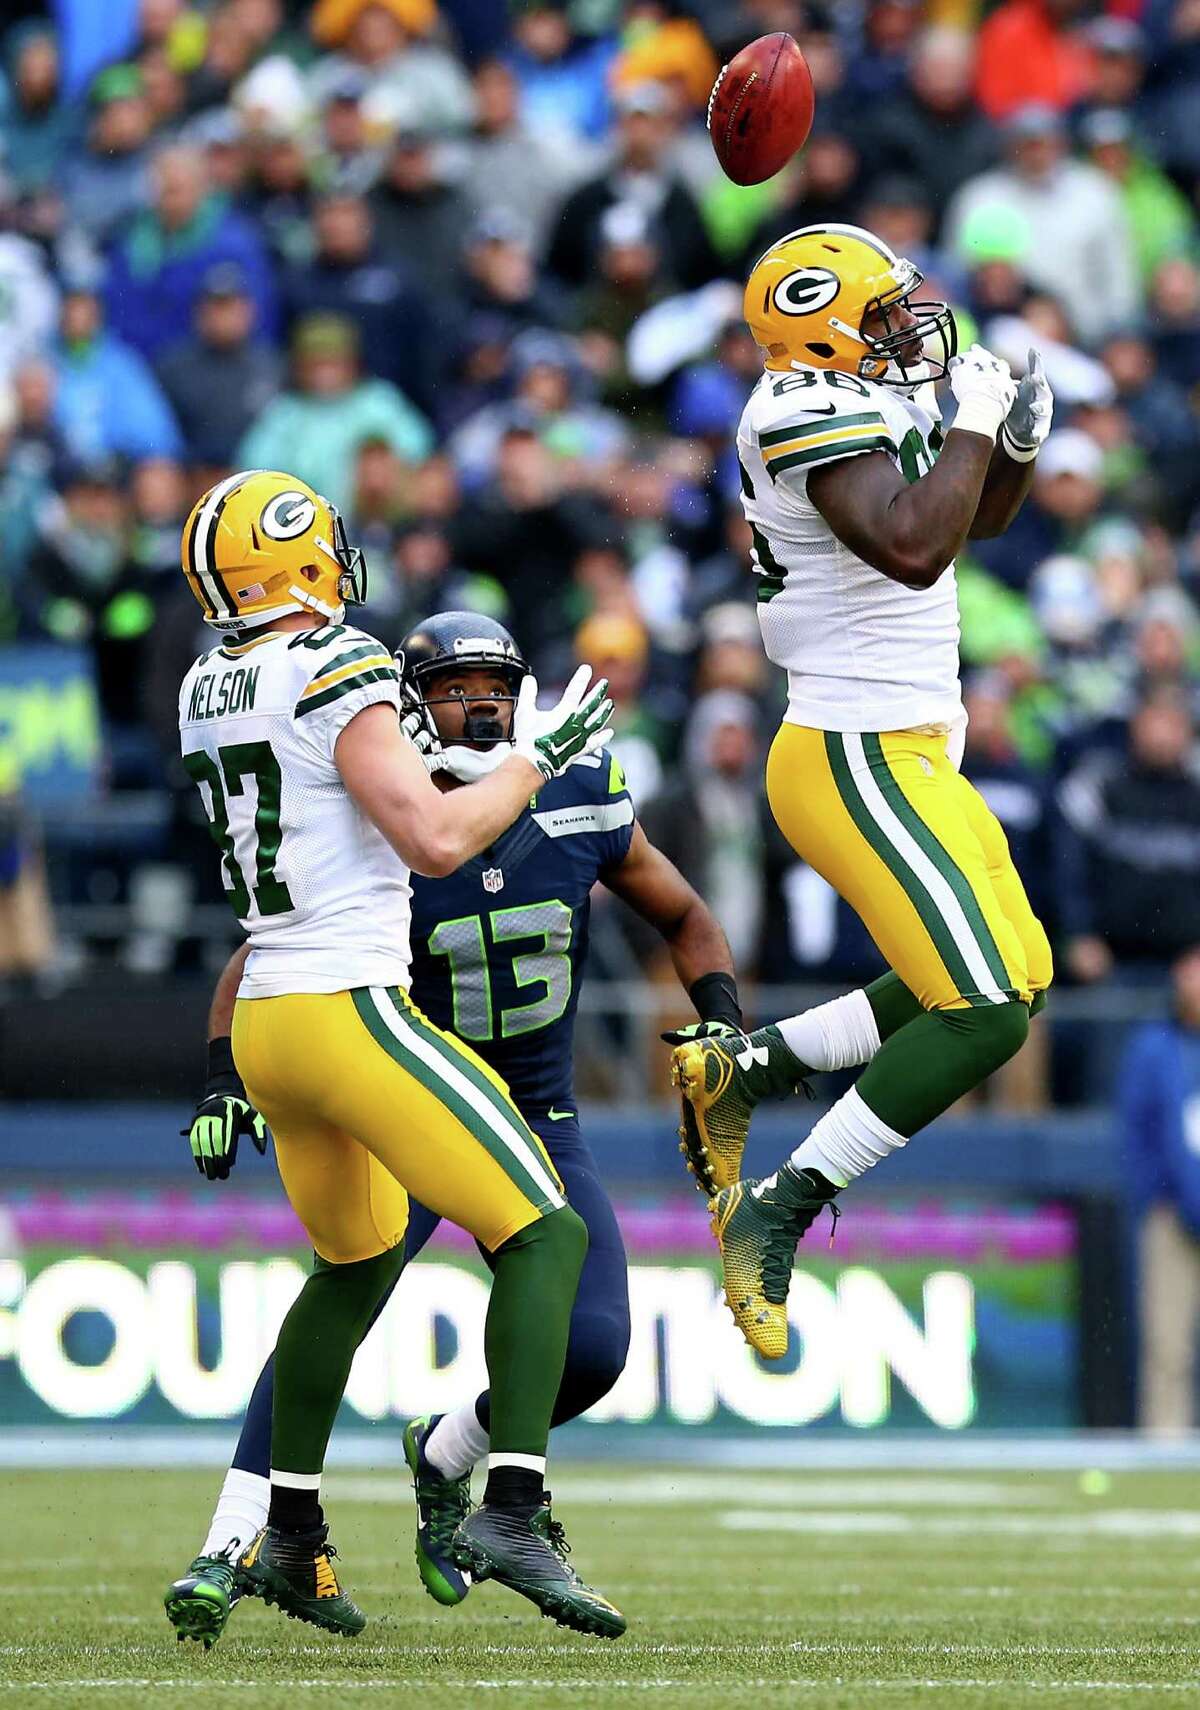 2014 NFC Championship Game The Packers had a 12-point lead on the Seahawks with less than three minutes left, but blew it, giving up a touchdown and then bungling an onside kick before giving up another score. Greeen Bay's fate was then sealed when Seattle scored in overtime.